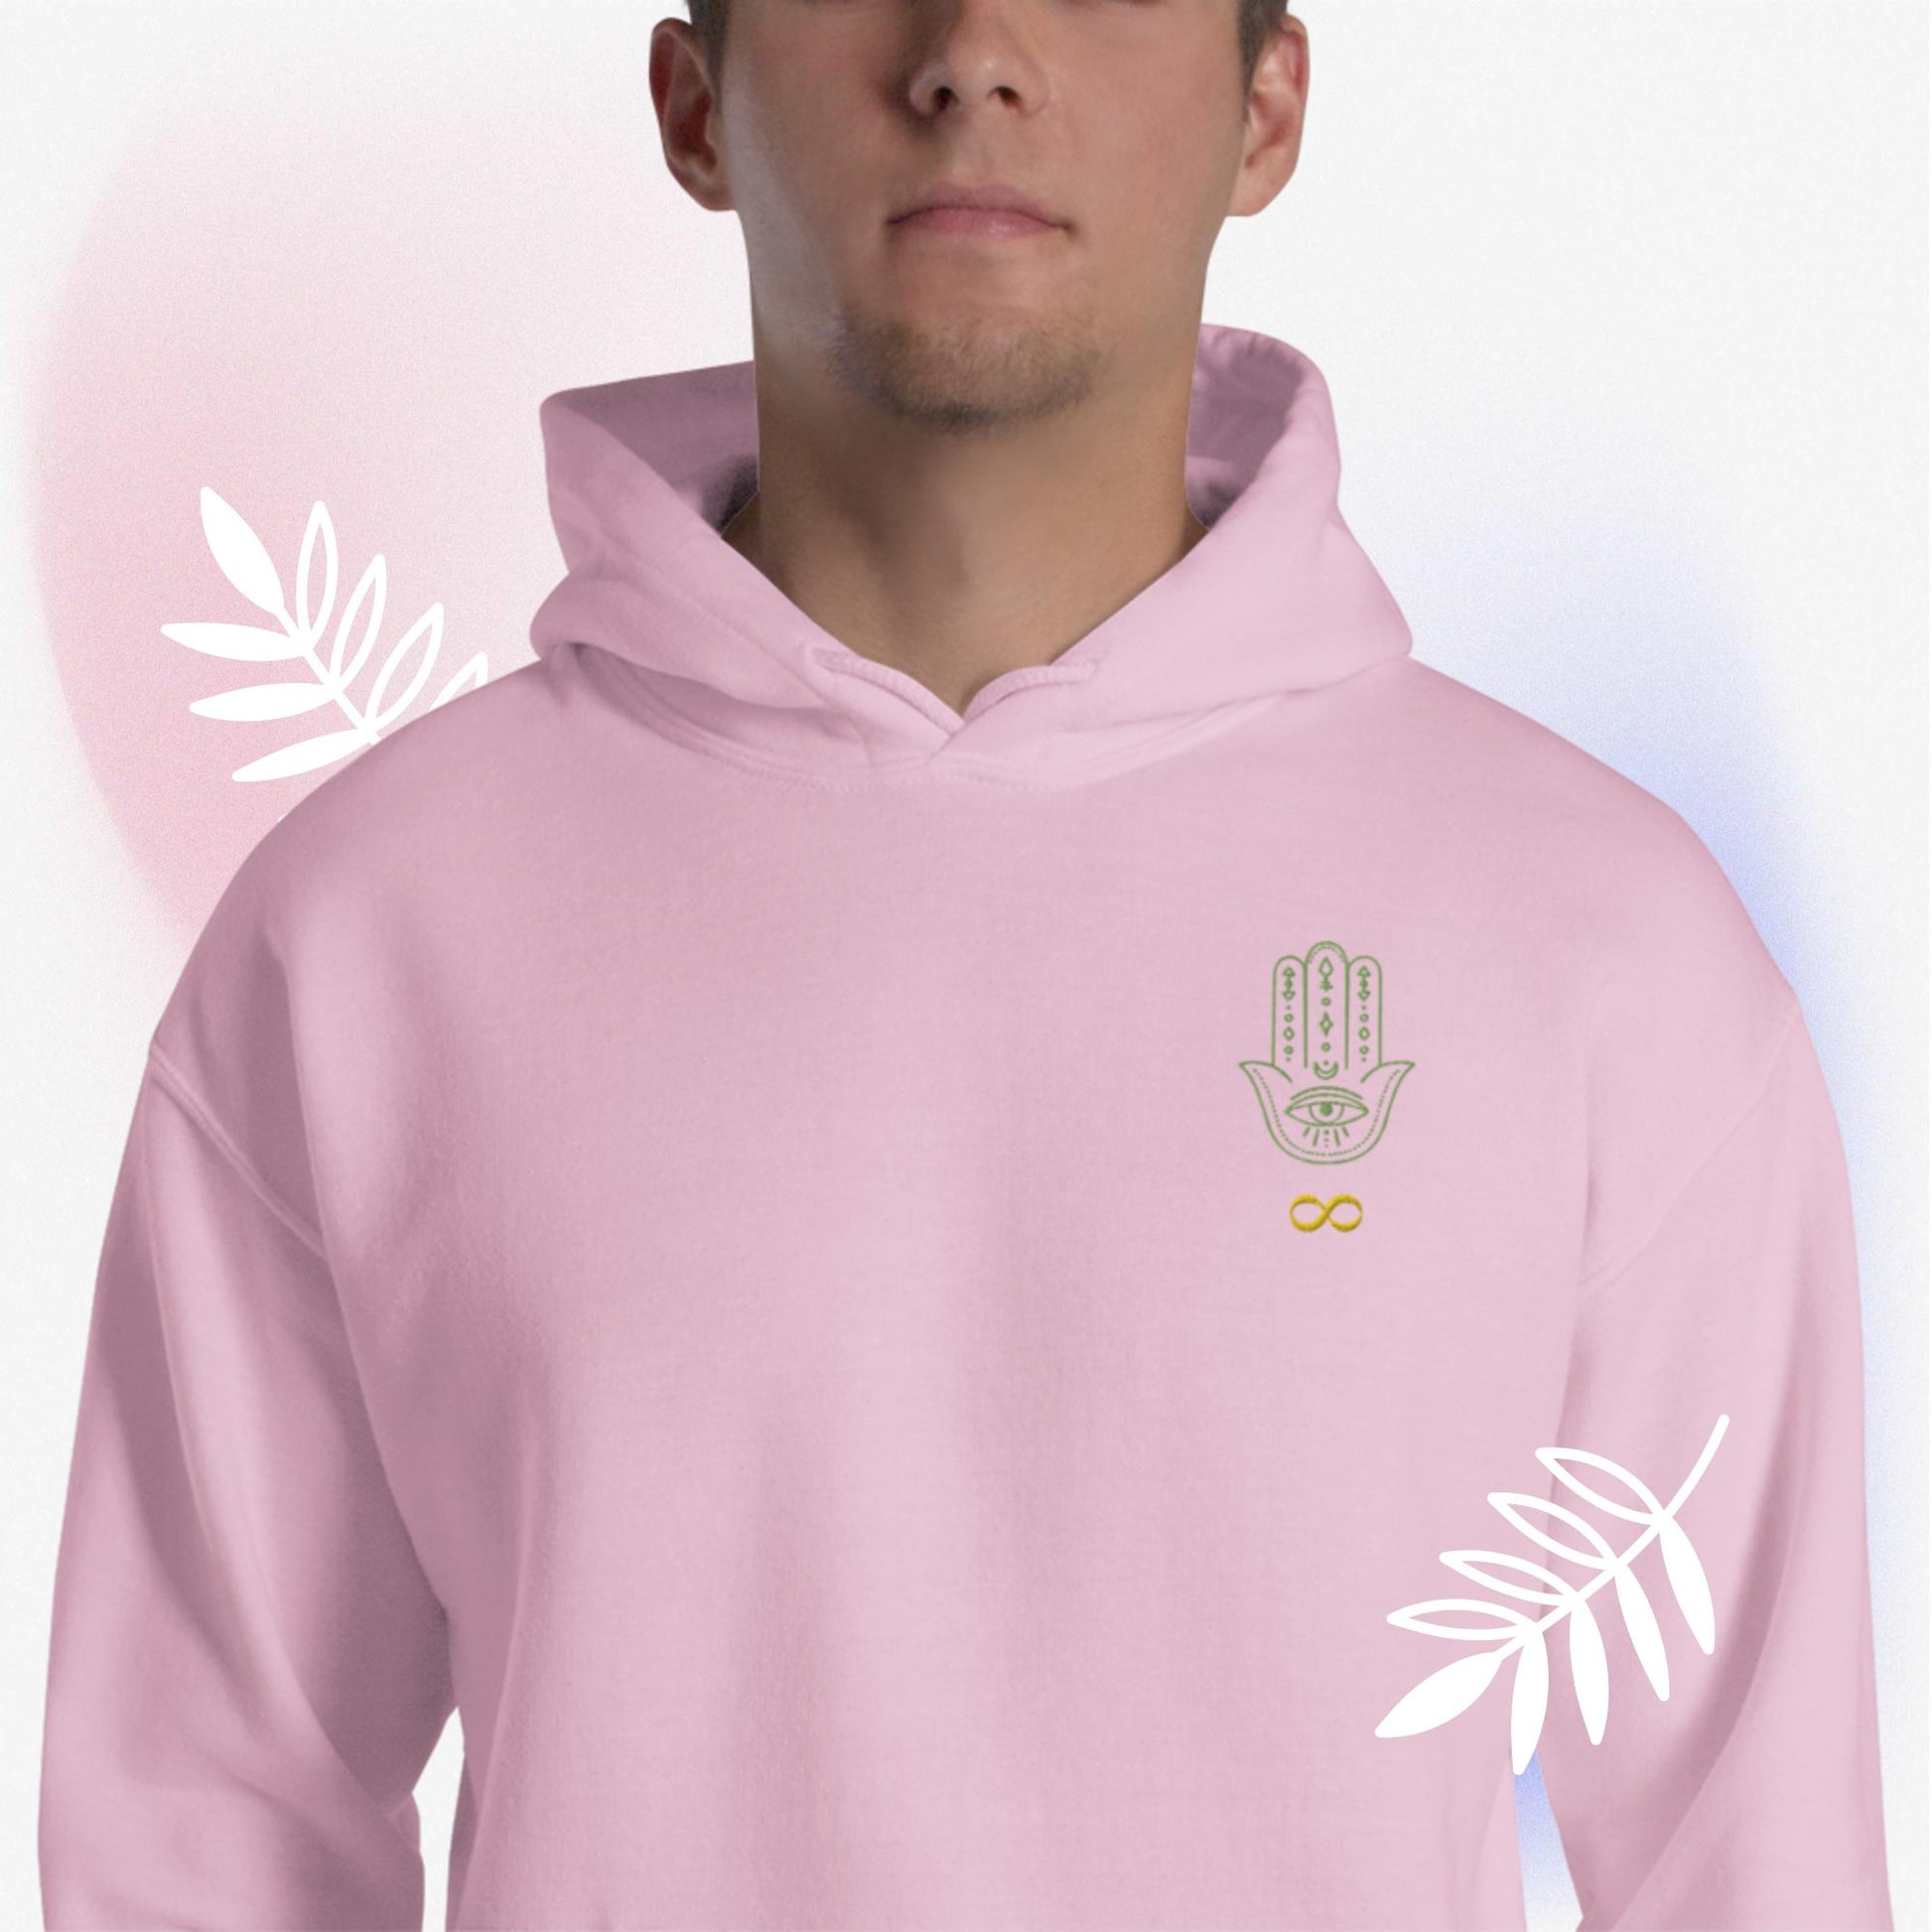 Light pink, unisex, heavy blend, hoodie, front. Embroidered, otherworldly, supernatural, hamsa hand/infinity symbol logo. Worn by male model, surrounded by white leaves, and pink and blue hues. JAMILLIAH'S WISDOM IS TIMELESS SHOP - wisdomistimeless.com.